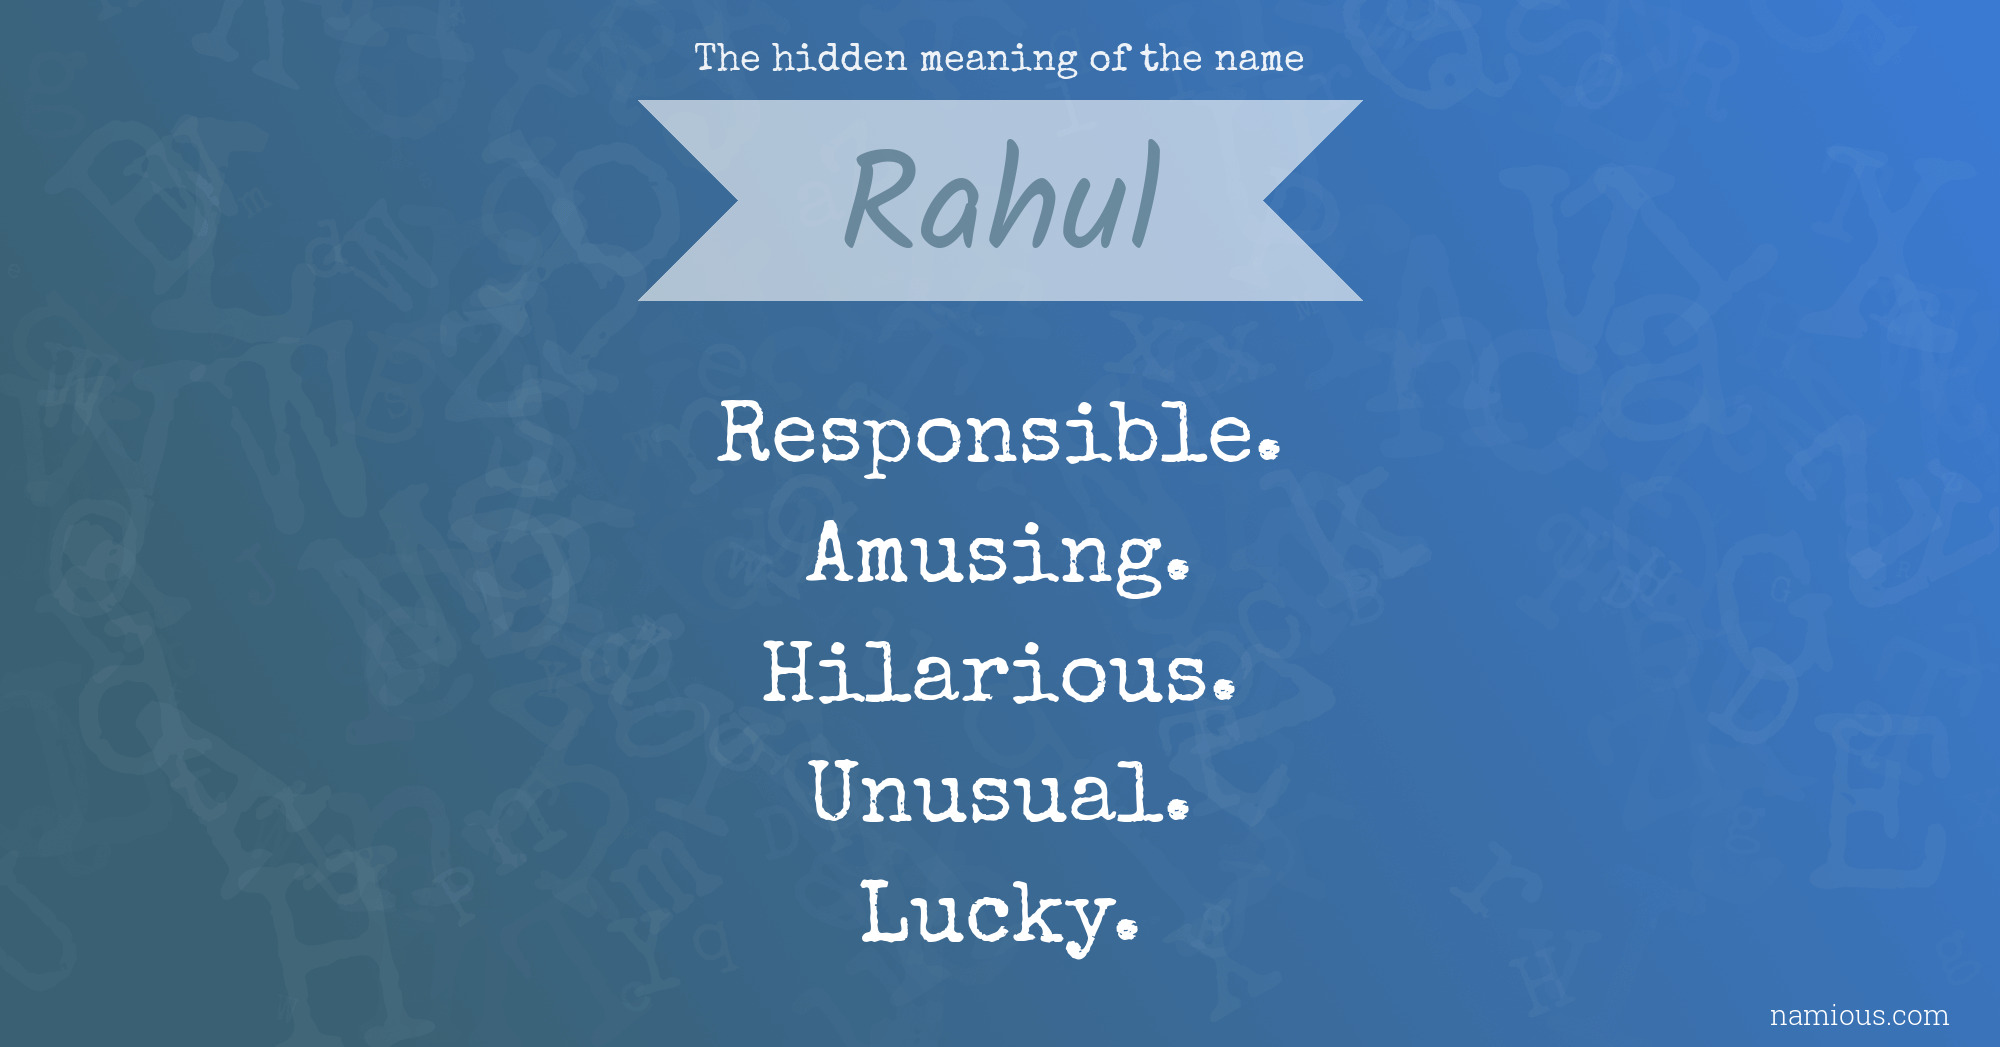 The hidden meaning of the name Rahul